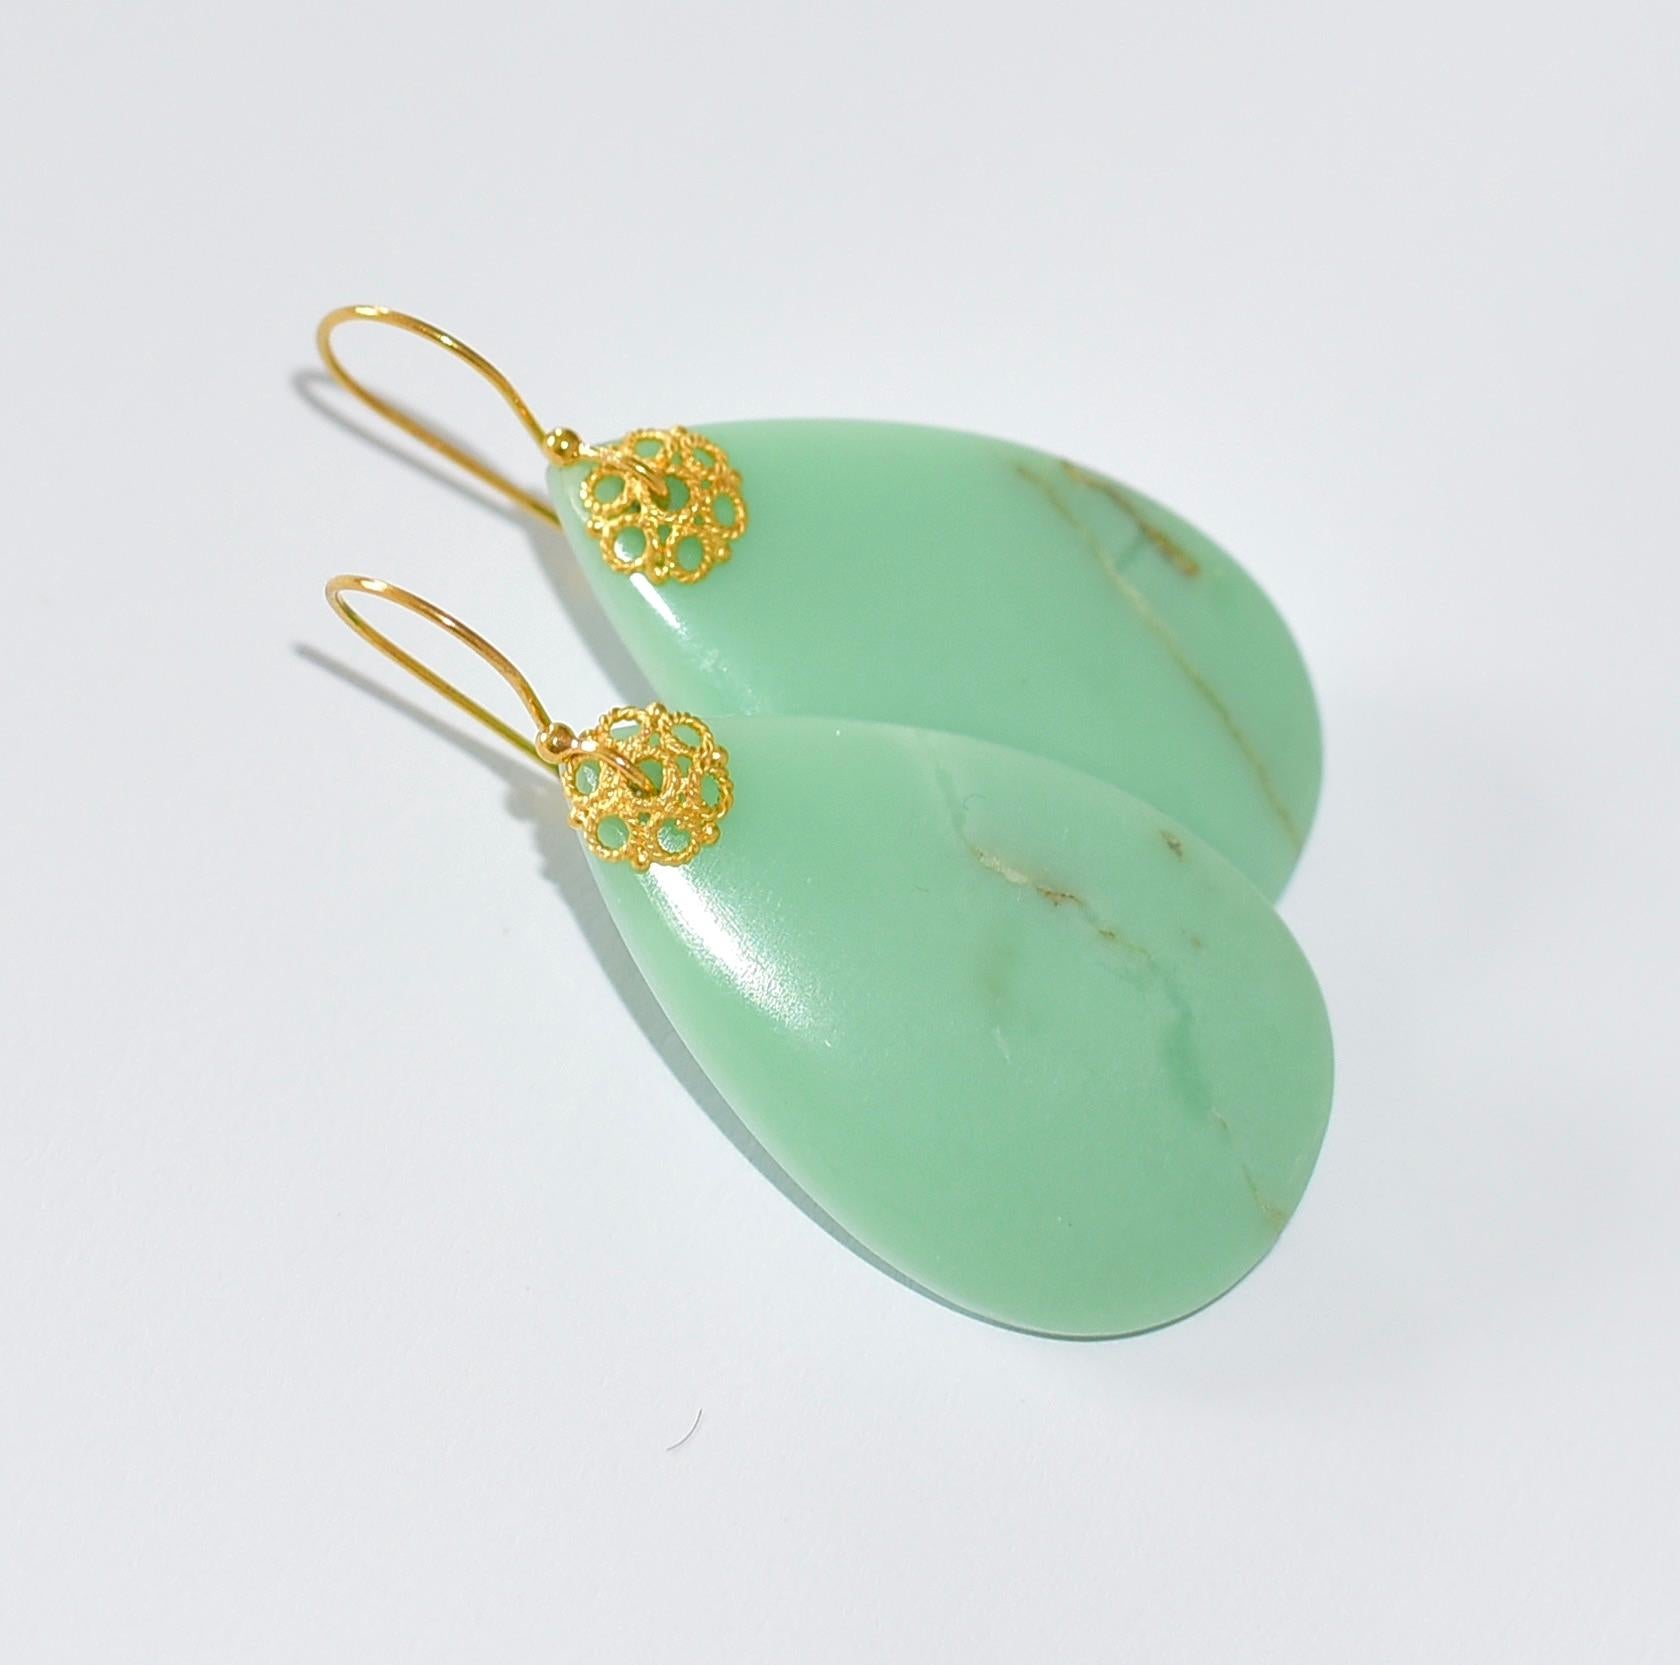 These bold Chrysoprase drops are a semi-opaque pastel minty green in a nice big statement size. They are rounded on both sides measuring a slender 4.5-5mm thick with nice glossy surfaces. They are front drilled at the tips and with just a few minor